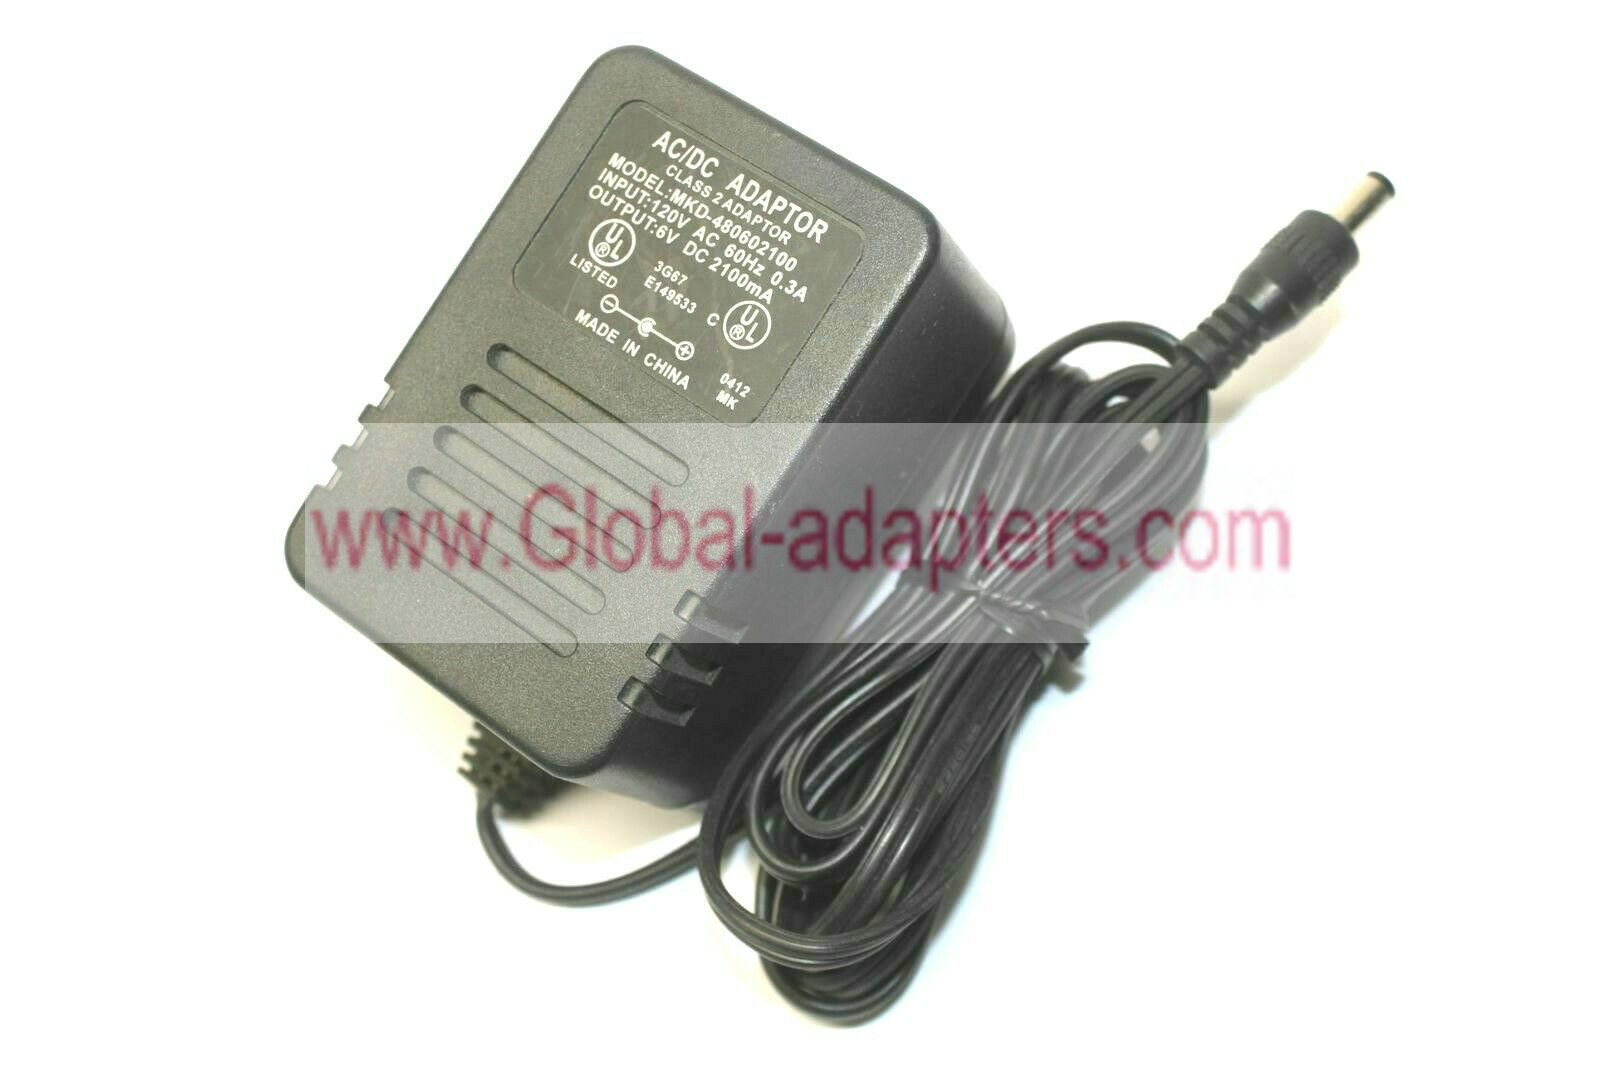 New 6VDC 2100mA Class 2 AC DC Adapter MKD-480602100 Power Supply Charger Transformer